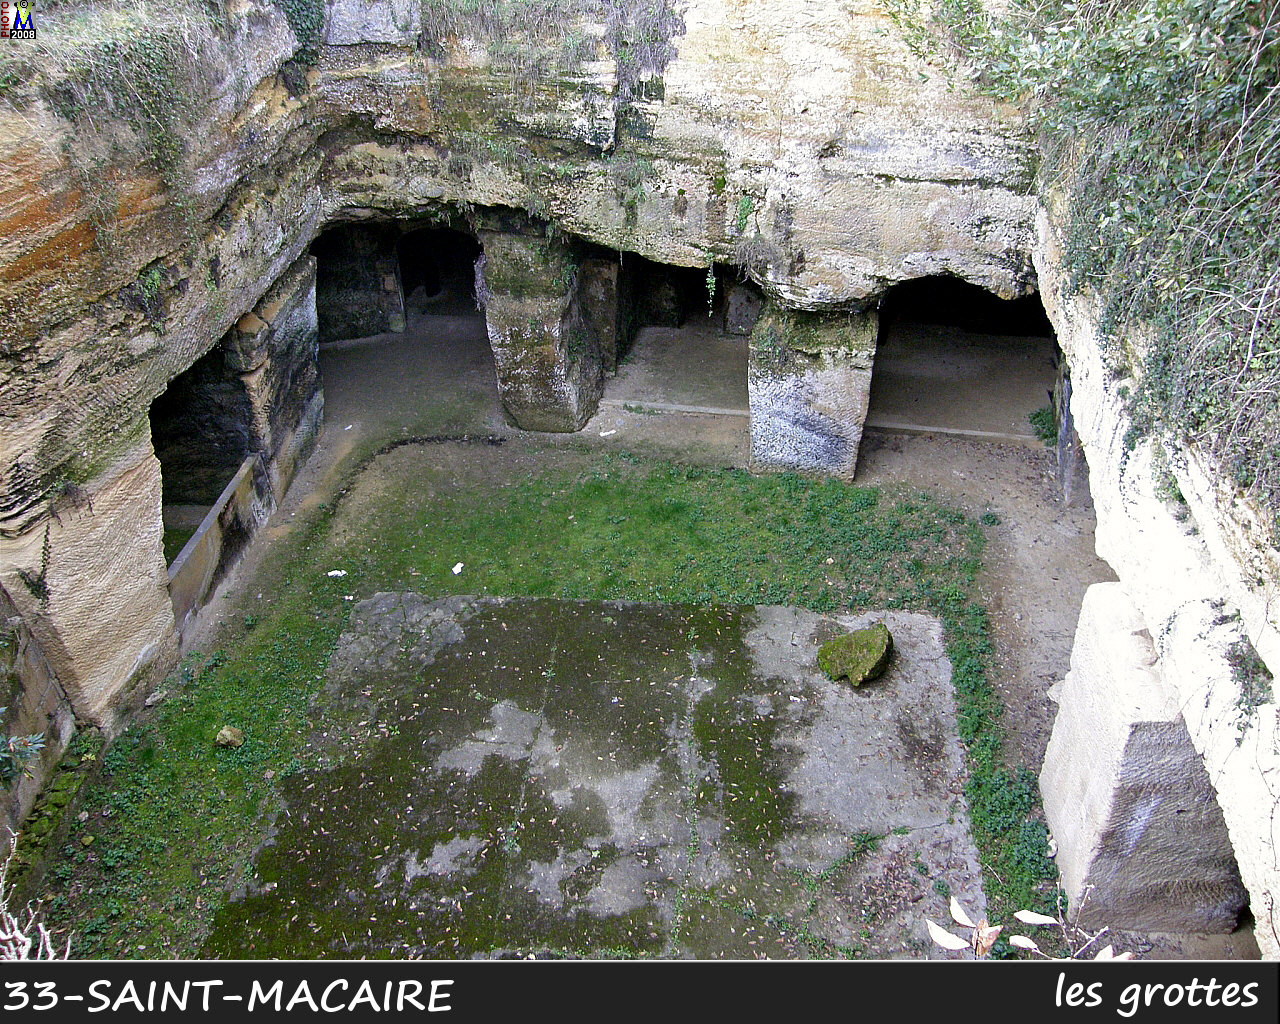 33StMACAIRE_grottes_100.jpg